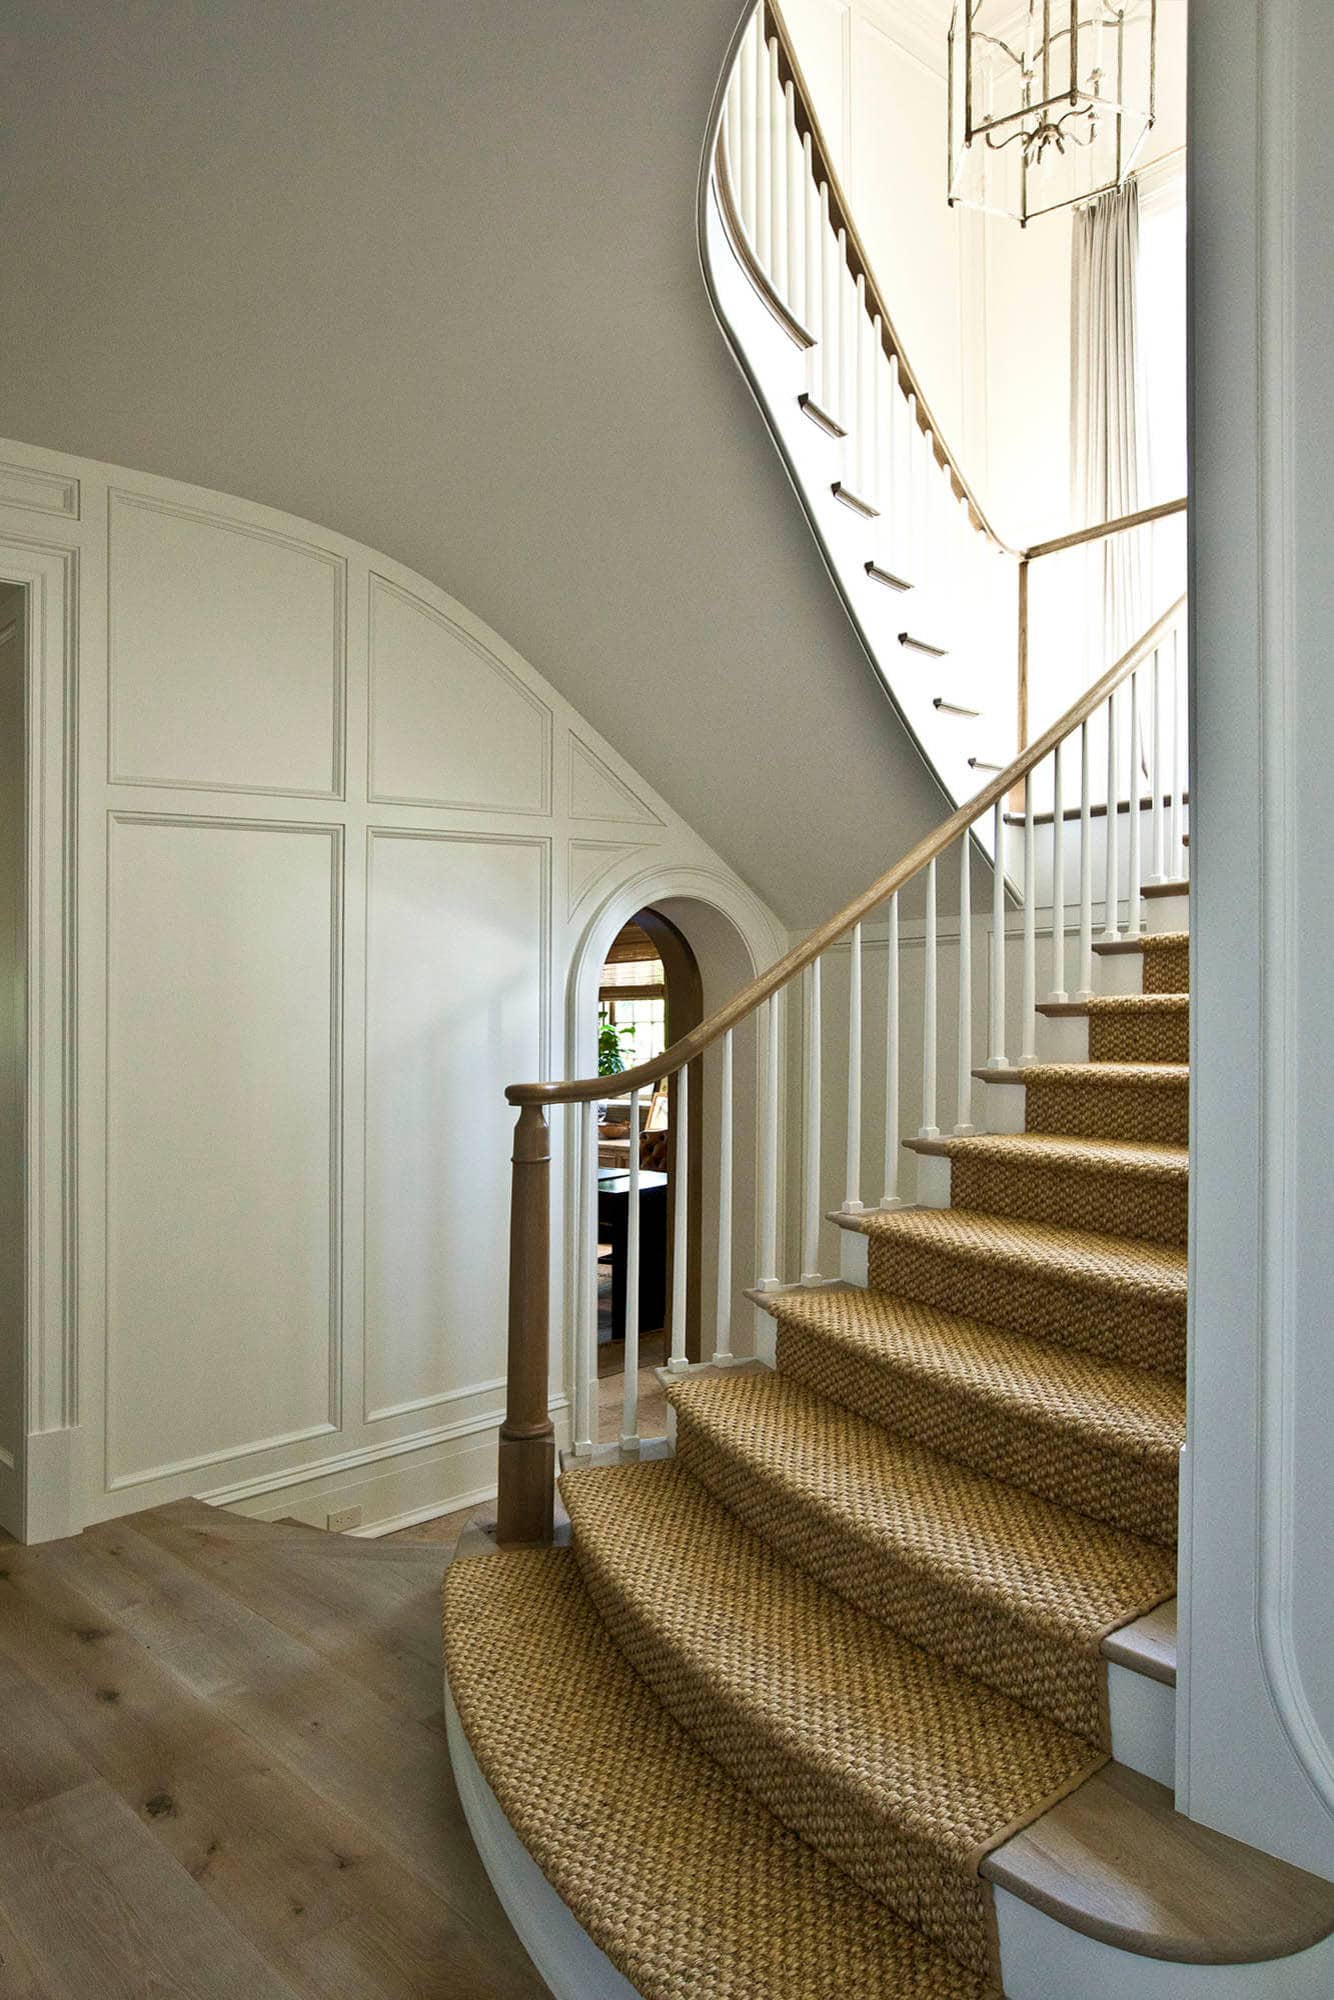 staircase featured in home tour that showcases an arched staircase and details